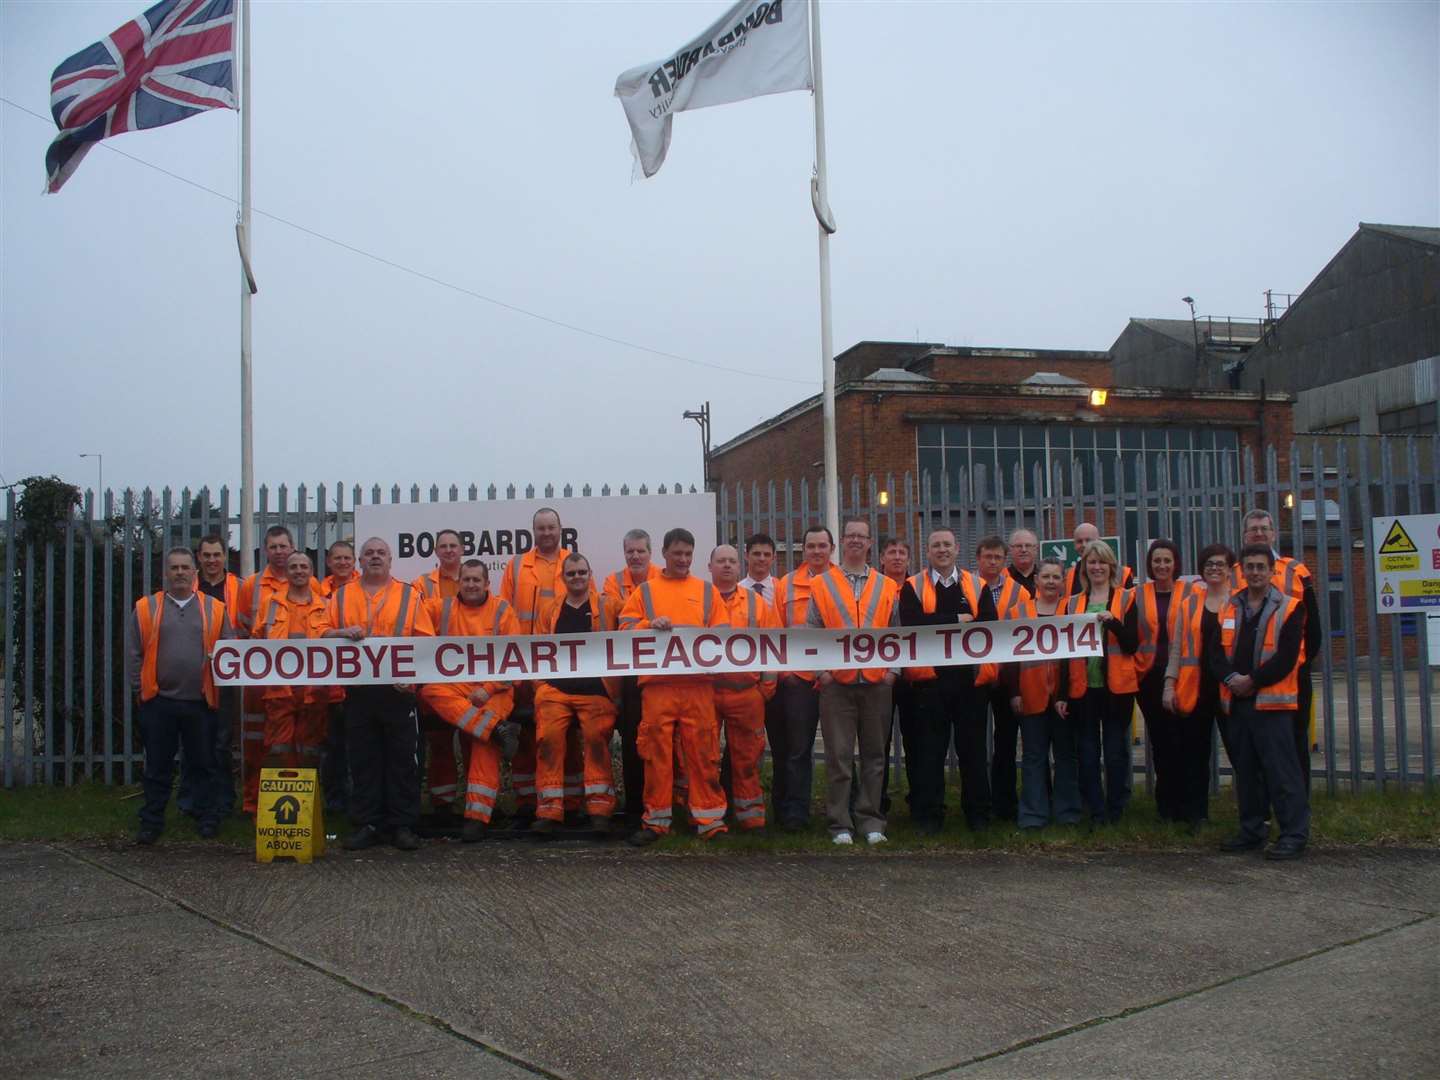 The workforce of Bombardier's Chart Leacon rail depot gather to mark its closure in 2014